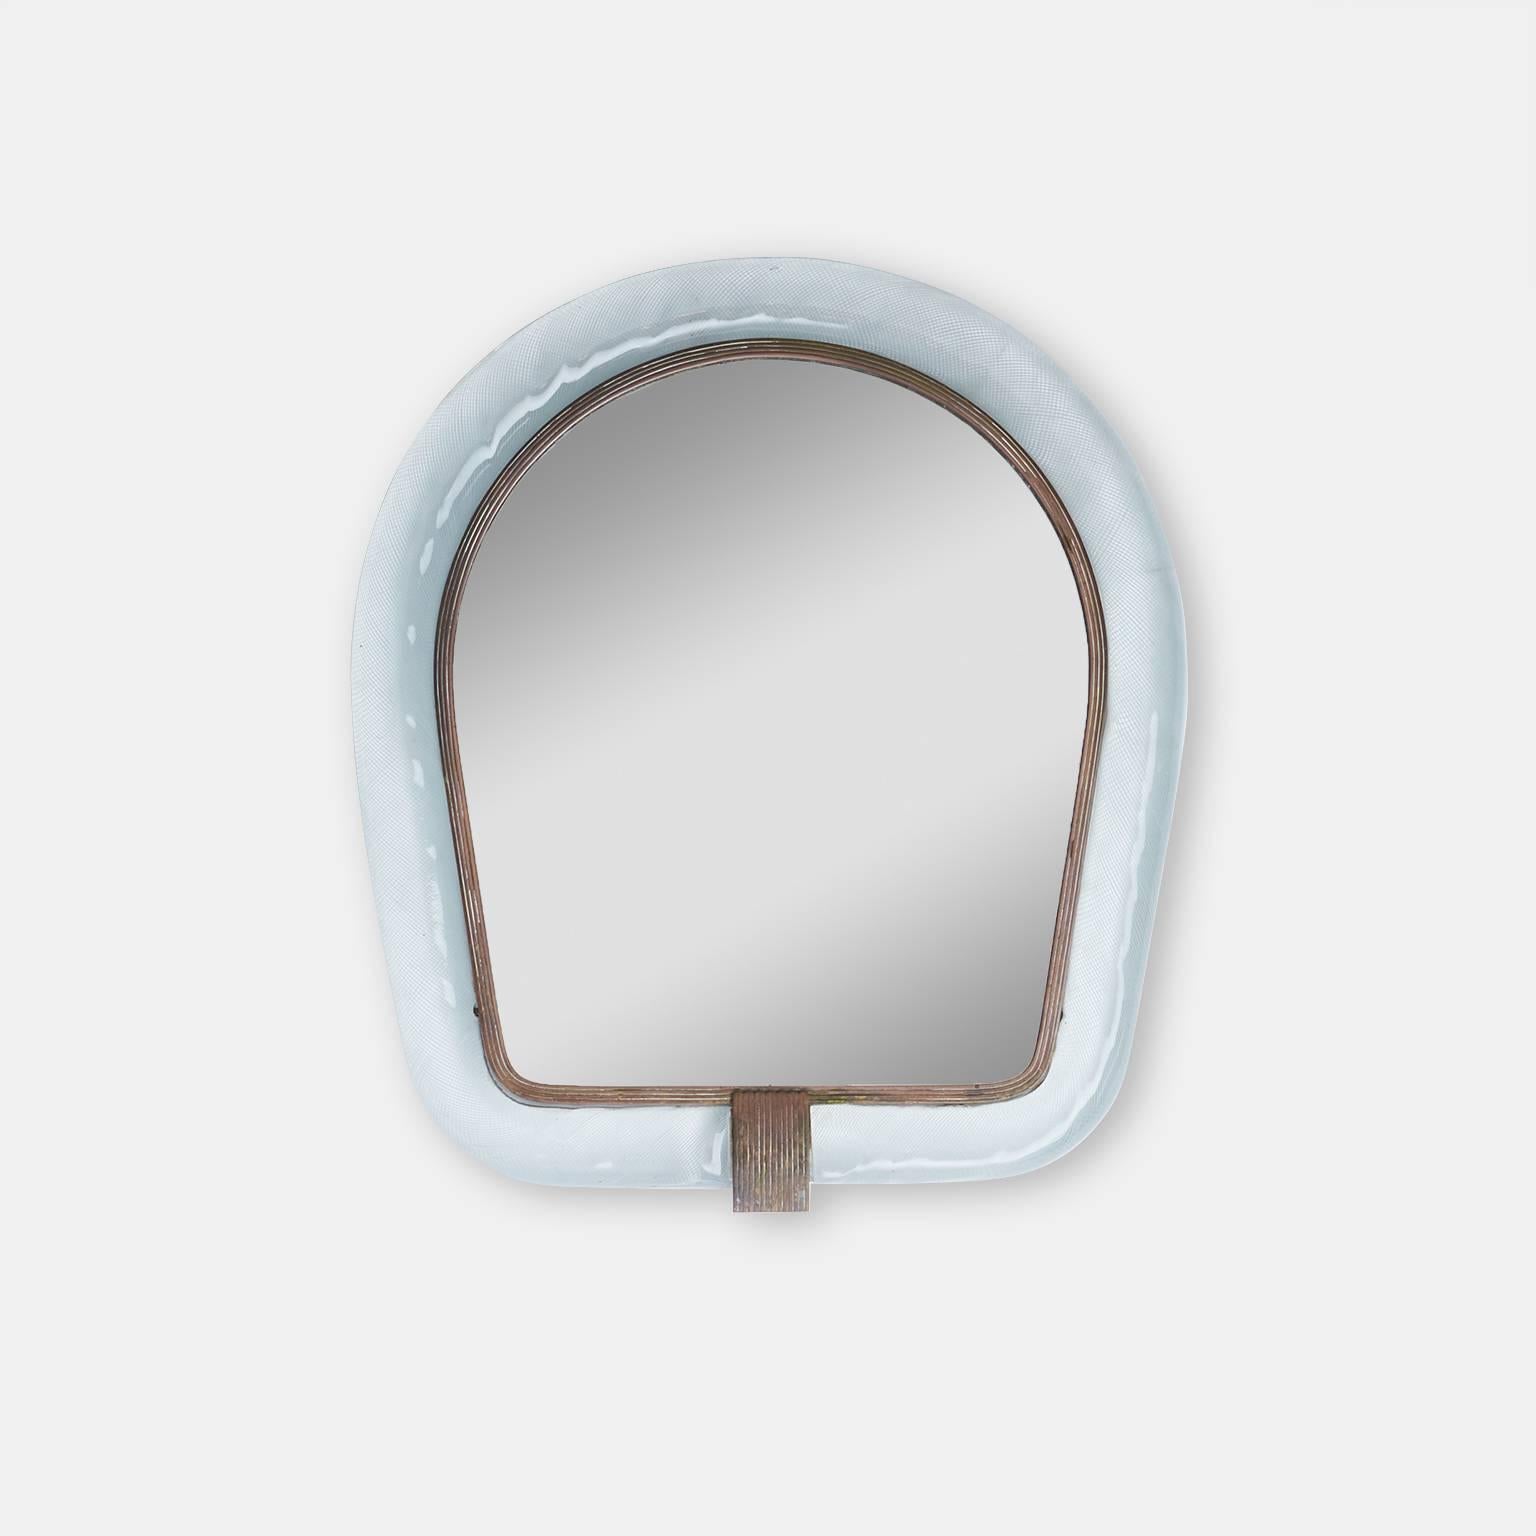 An arched top mirror with brass inner frame and braided Venini glass pattern.
Marked Murano.